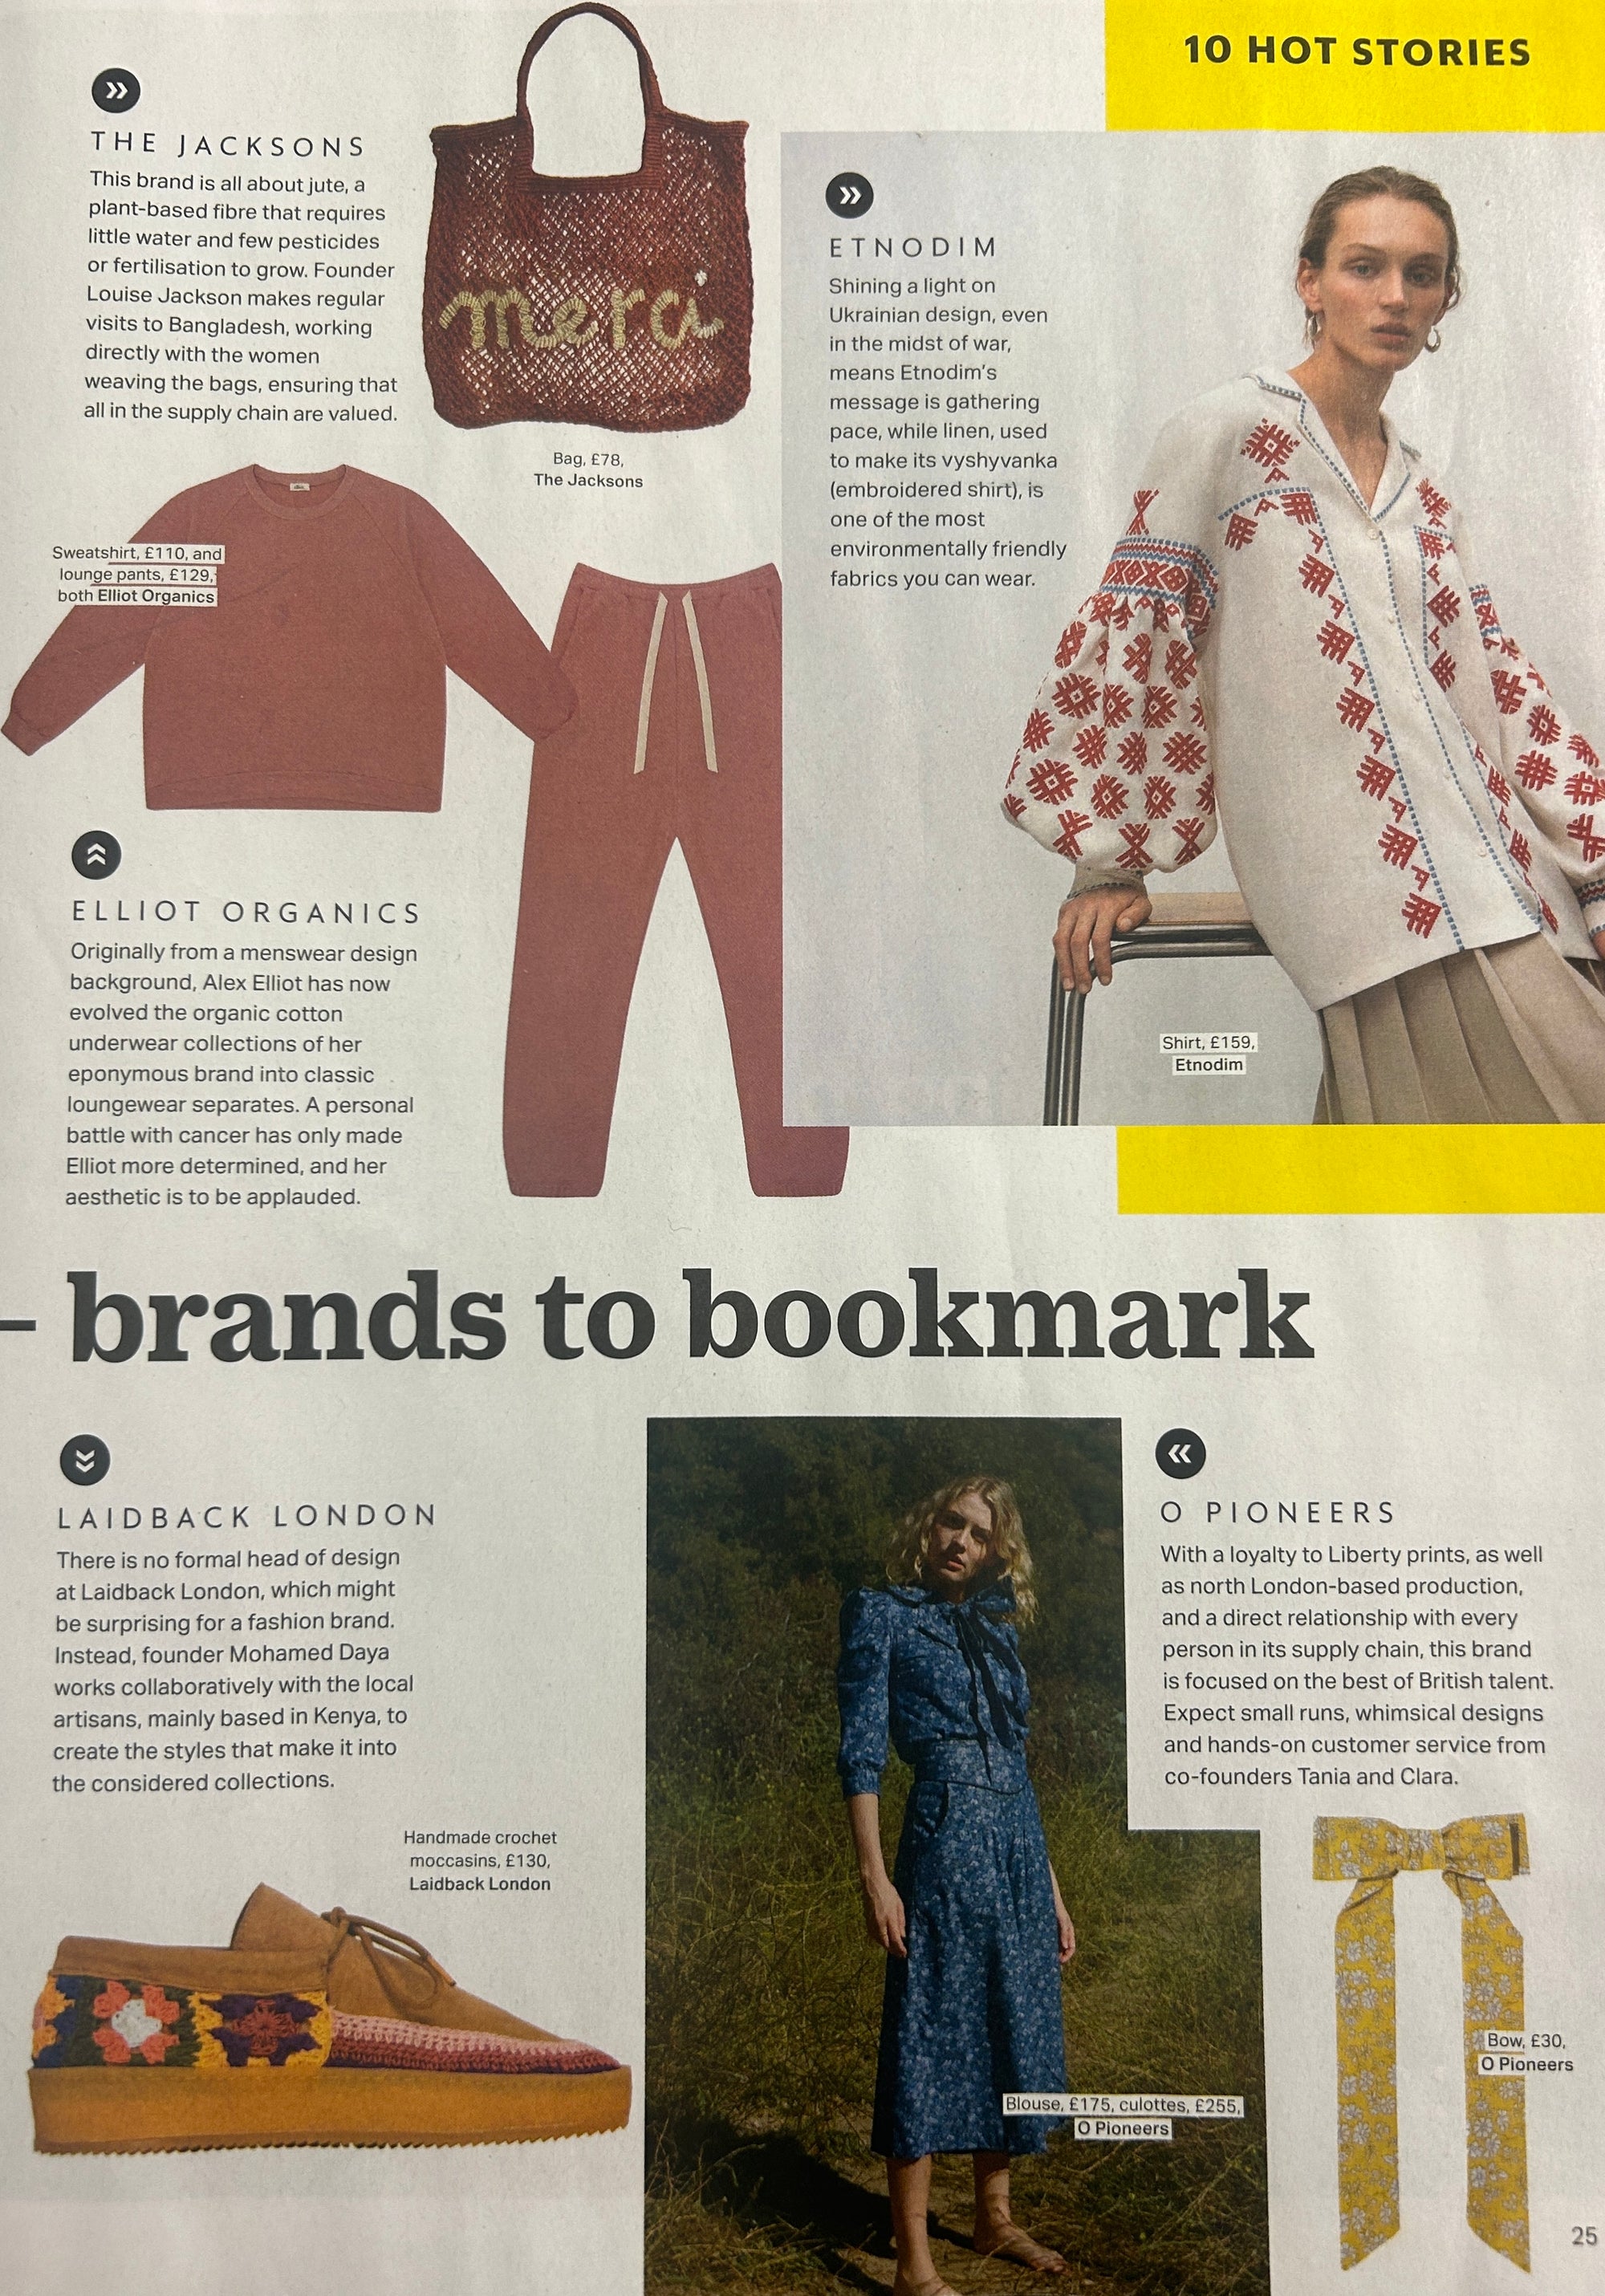 Grazia - Sustainable and affordable brands to bookmark